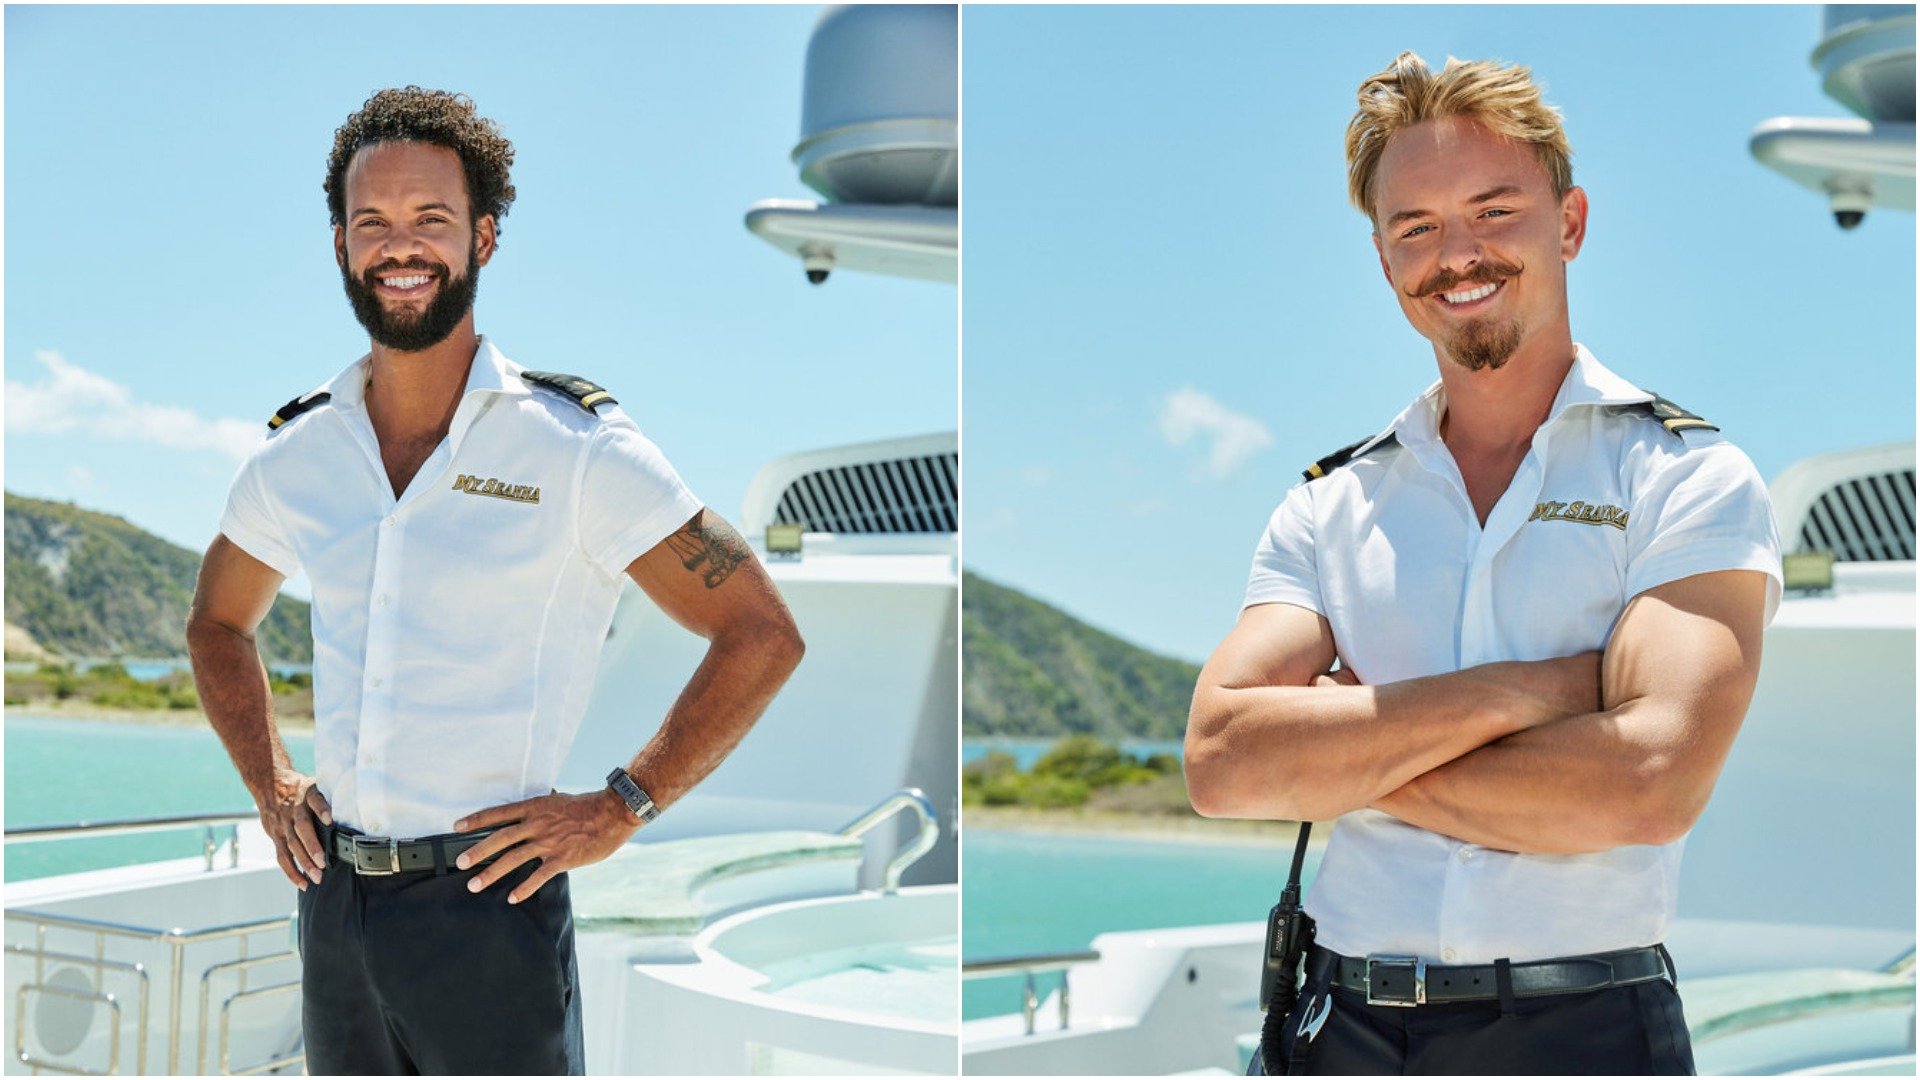 Wes O'Dell and Jake Foulger's Below Deck Season 9 cast photos